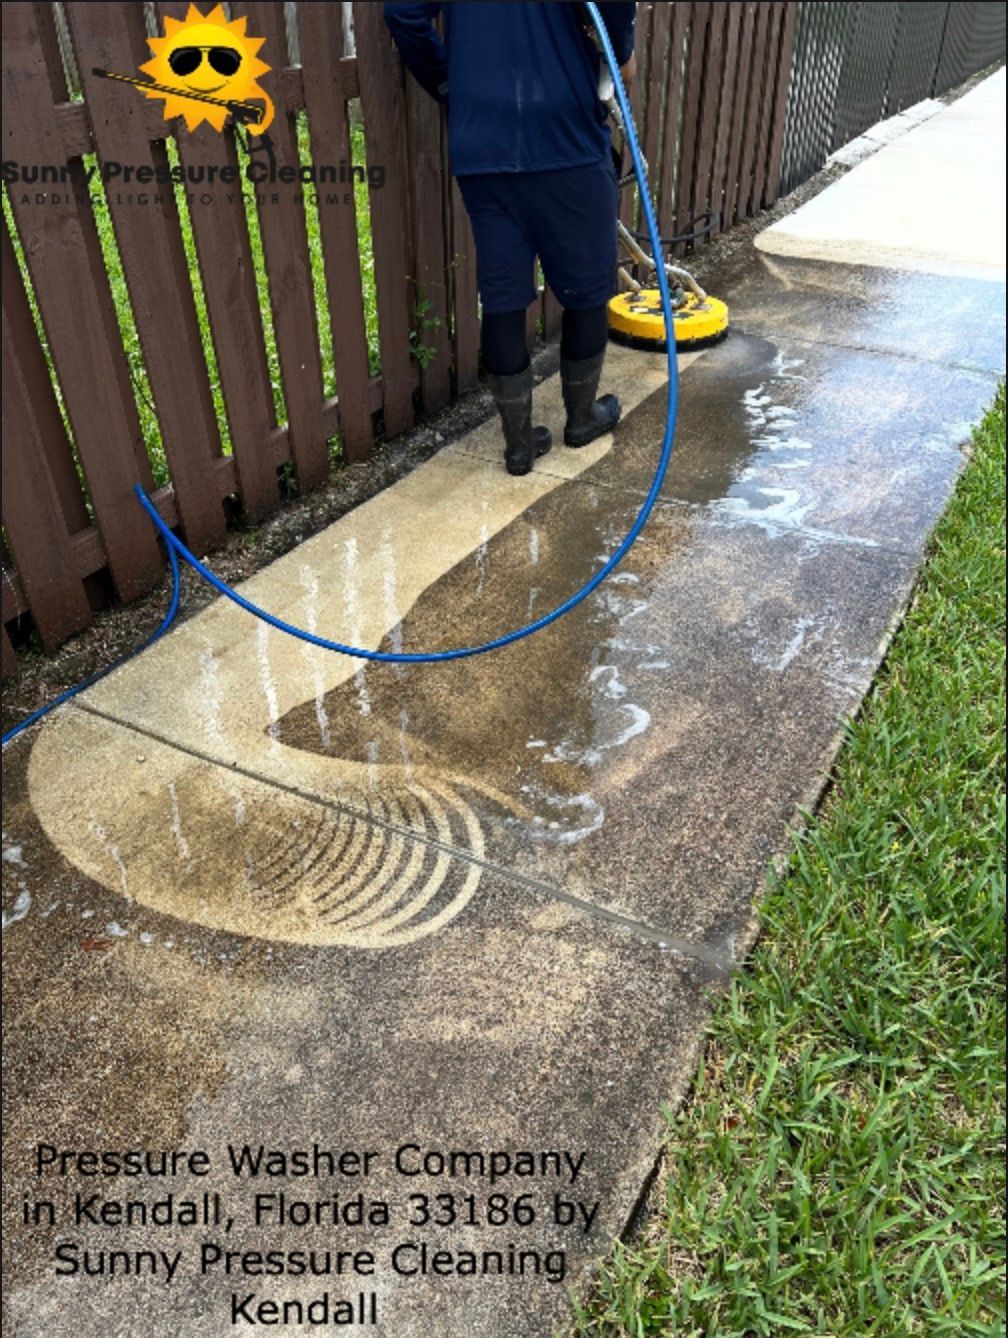 power washing in Kendall Lakes Florida by Sunny Pressure Cleaning Kendall' pressure washer